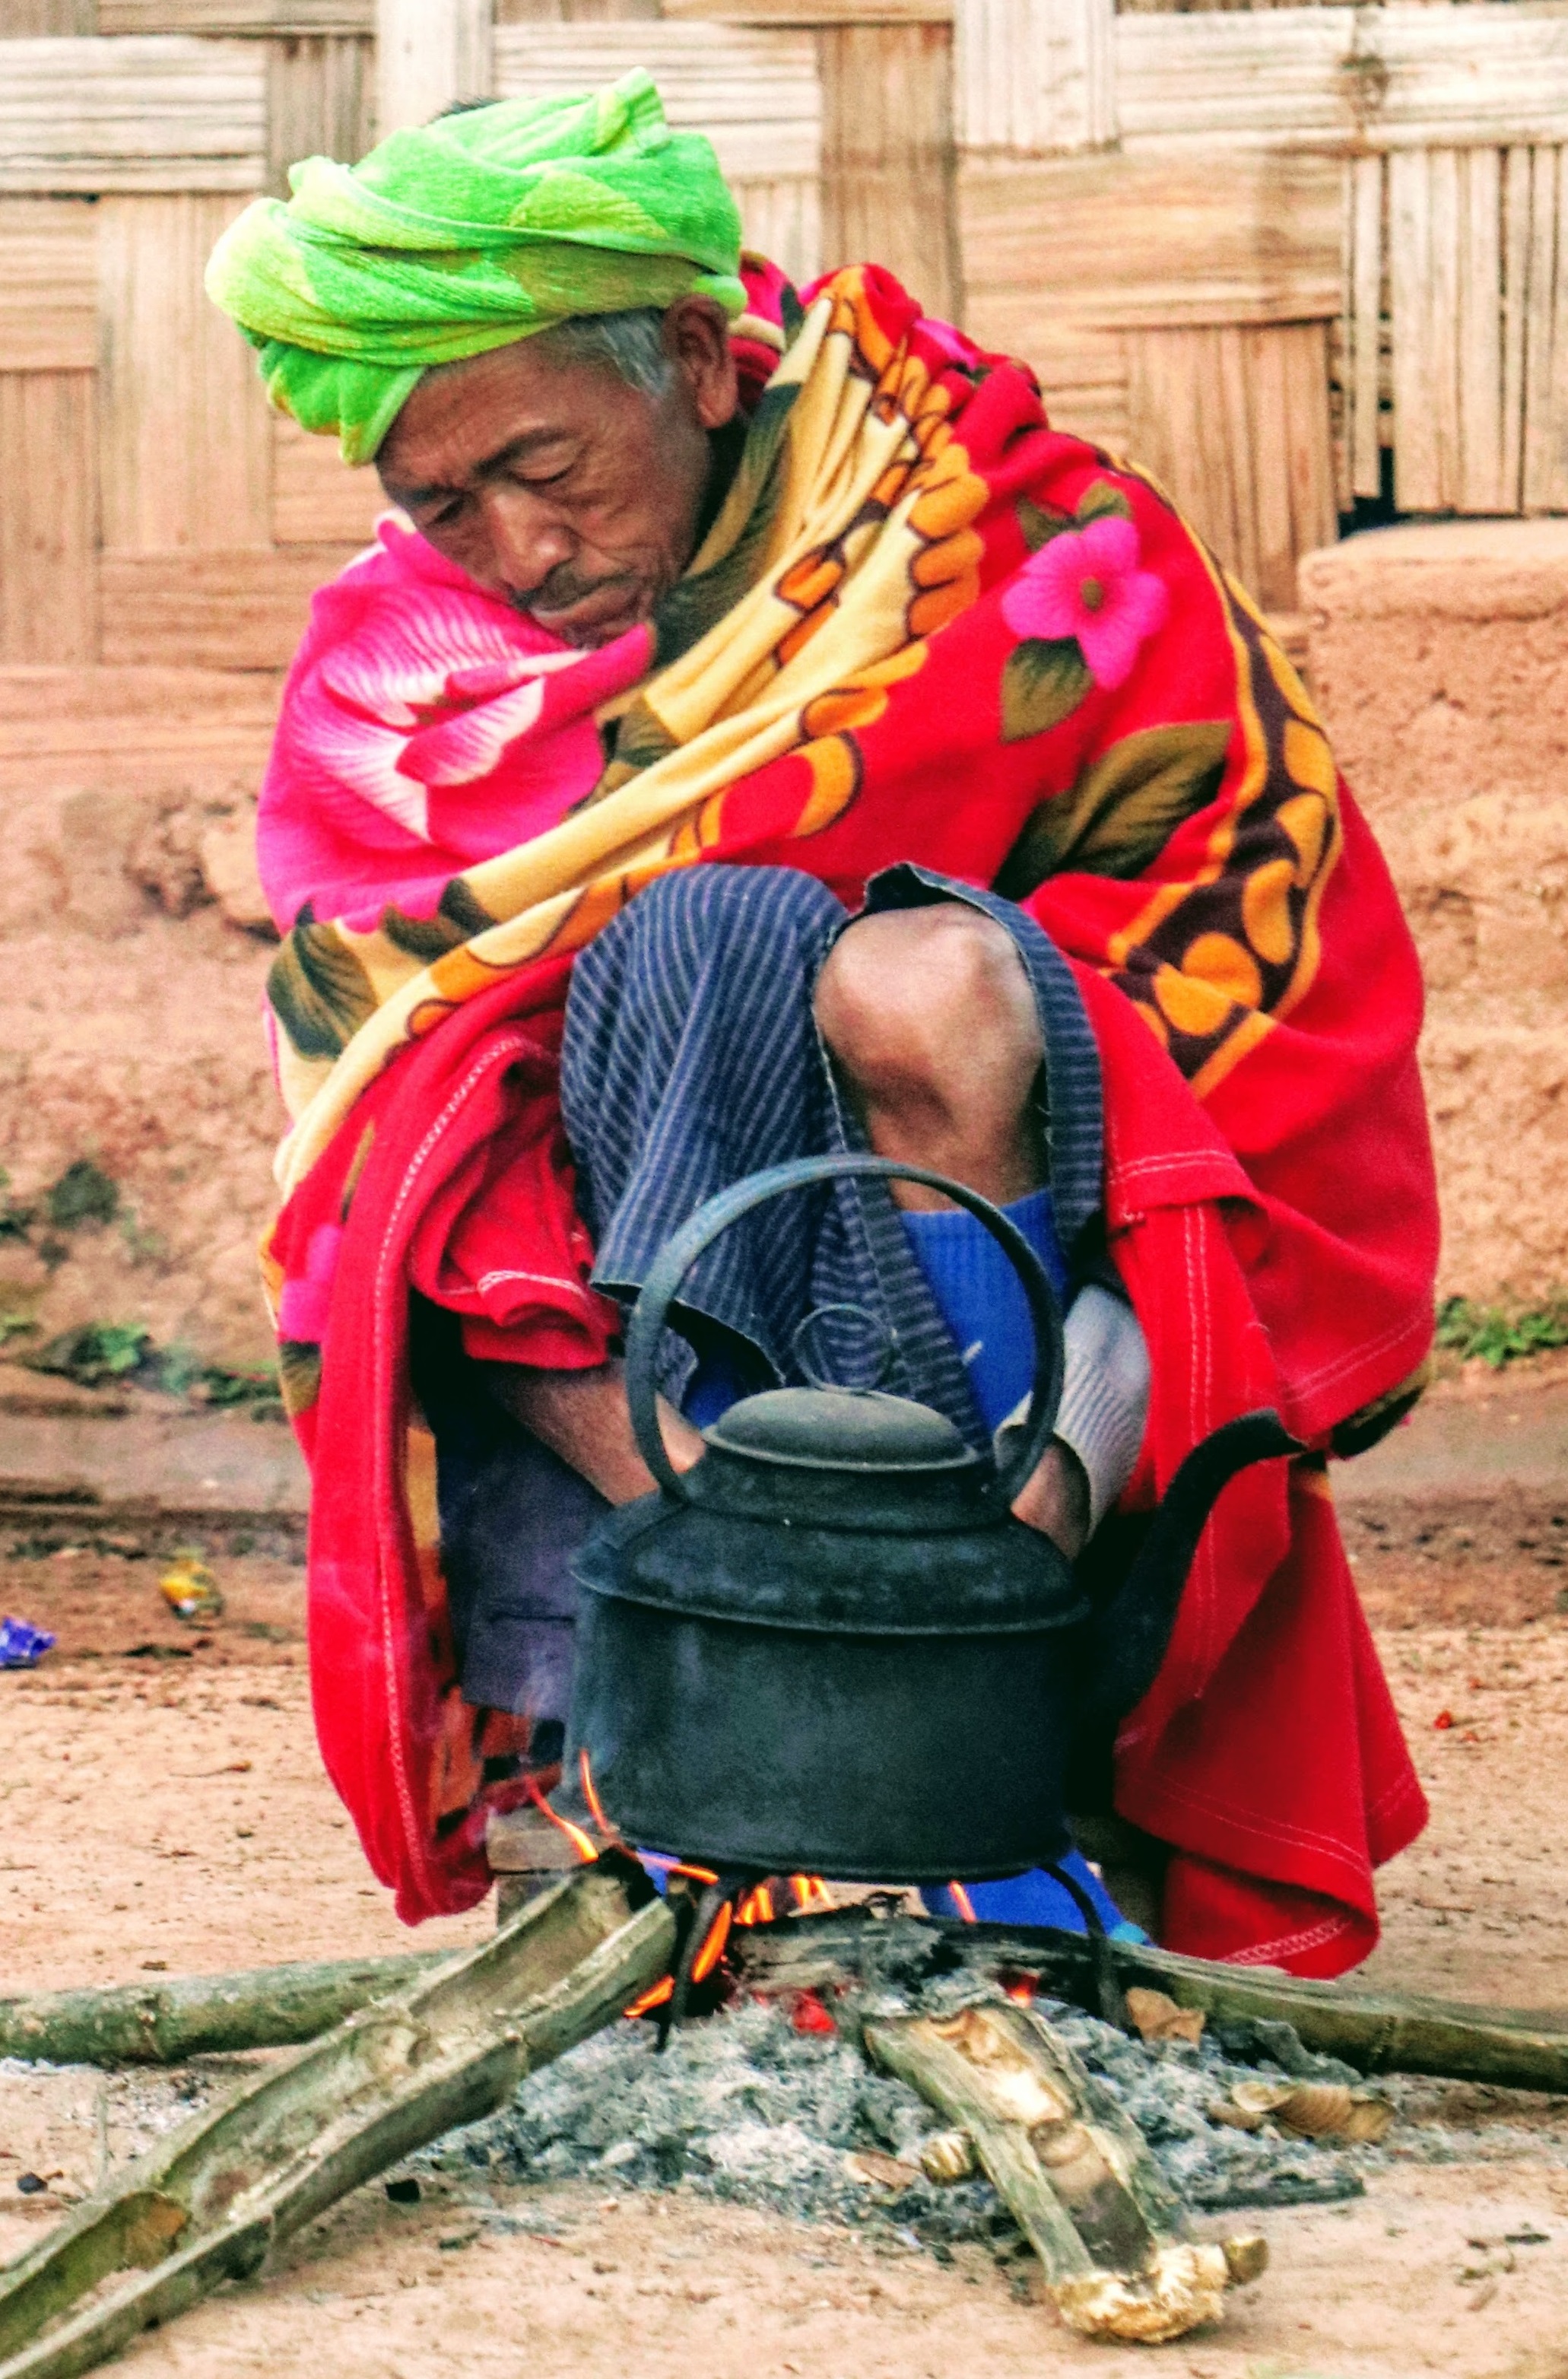 Old Burmese villager in bright green headwrap and red robe aslweep by his outdoor fire while waiting for tea pot to boil.